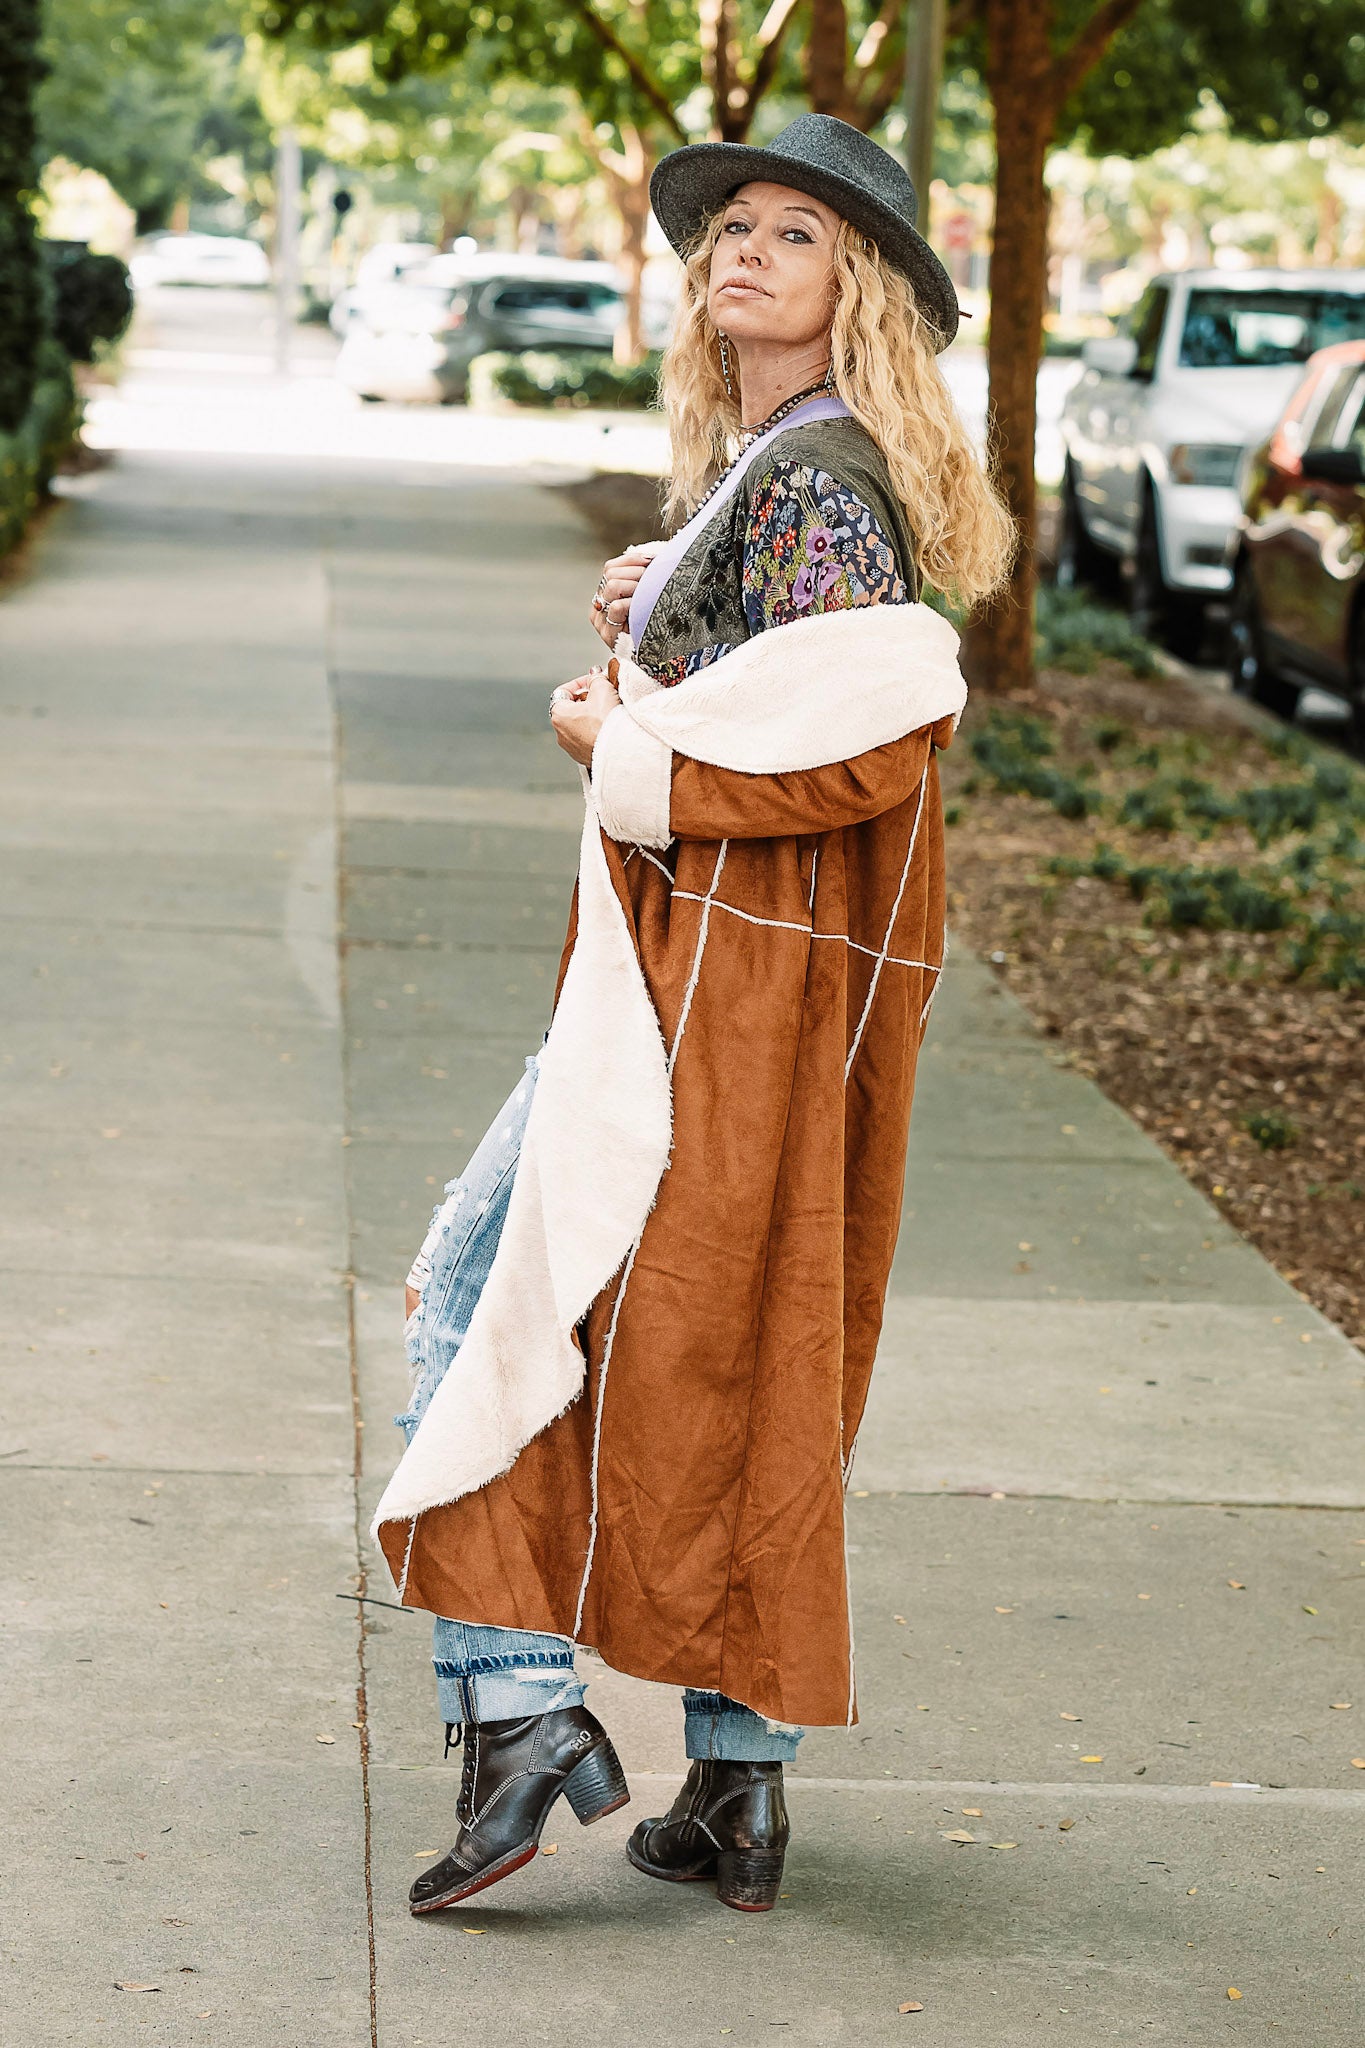 Load image into Gallery viewer, The Halle Suede Wrap Jacket in Camel - SpiritedBoutiques Boho Hippie Boutique Style Jacket, BIZ
